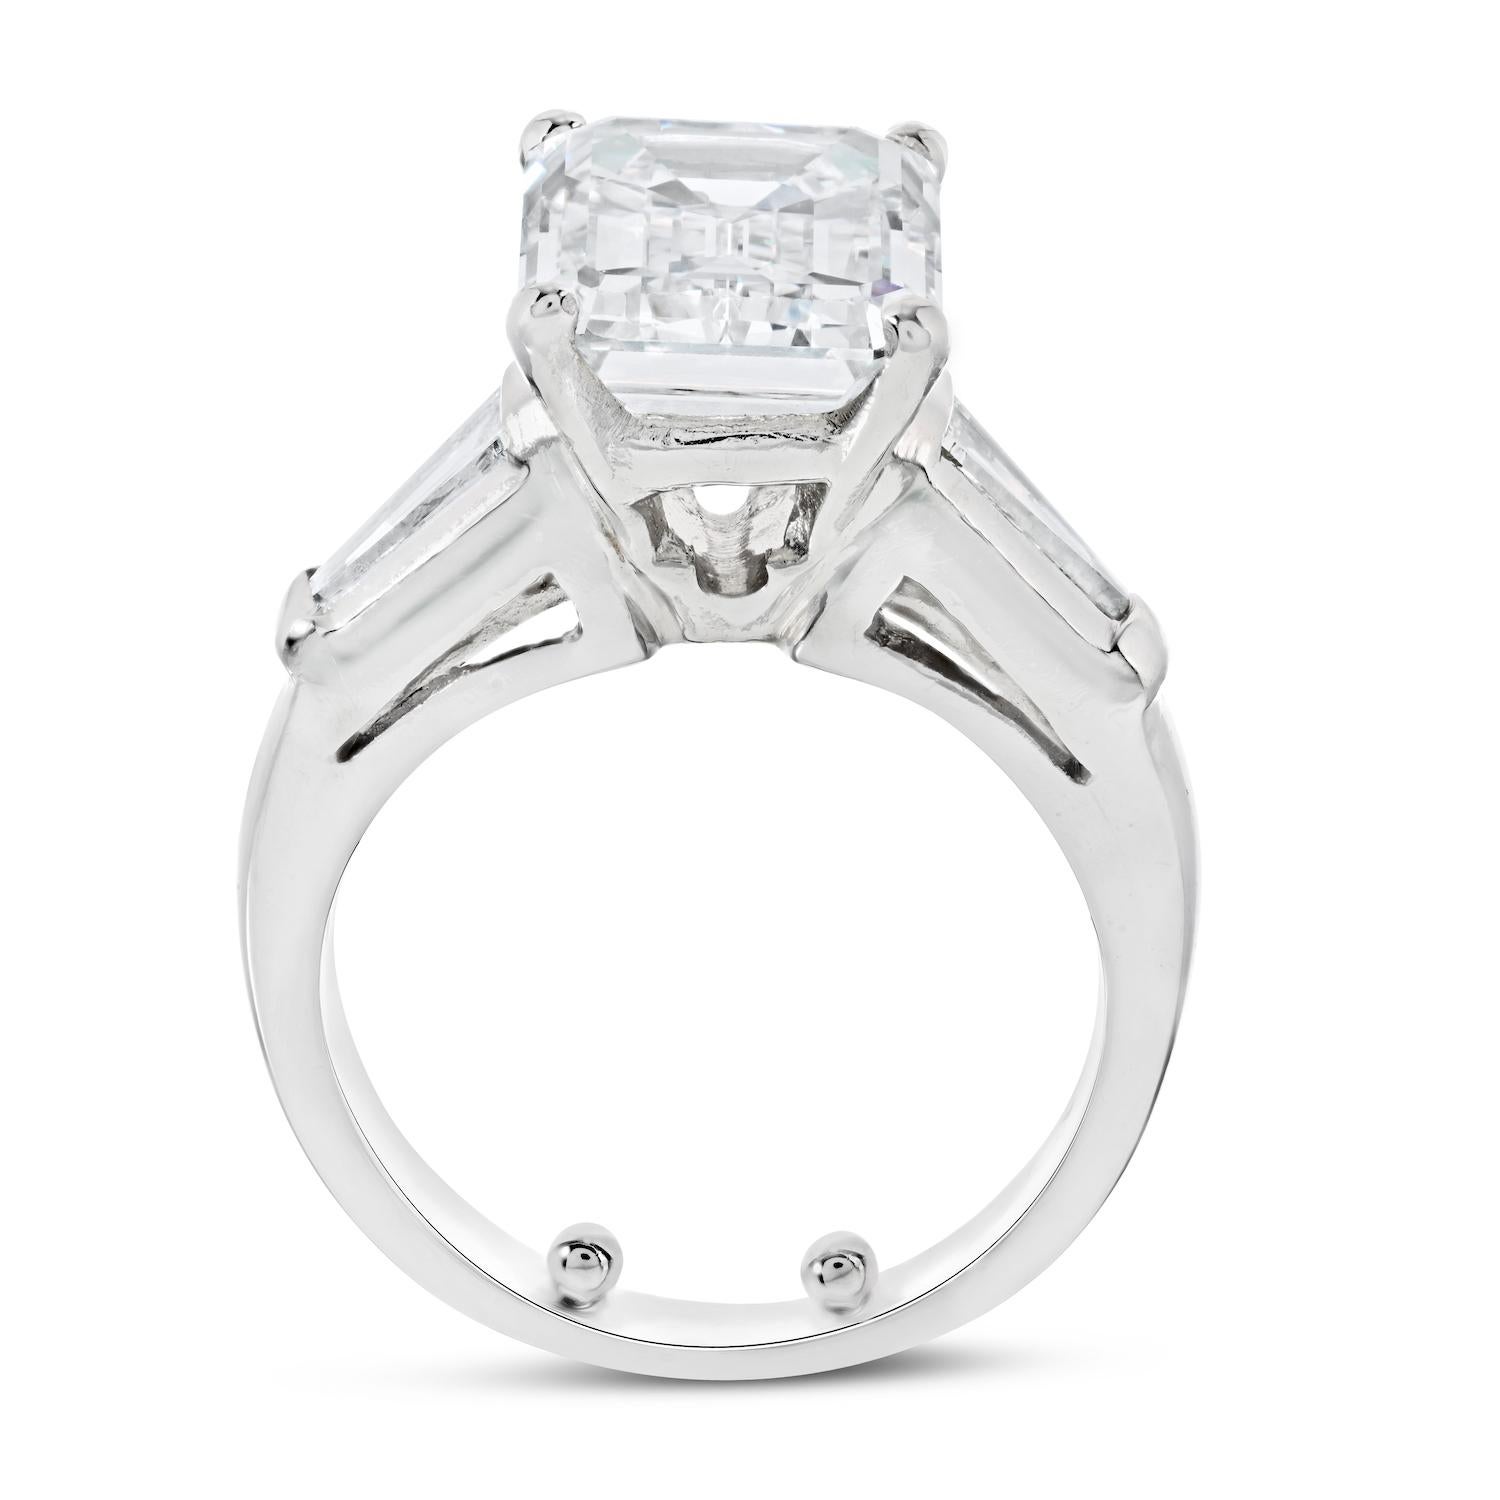 emerald cut diamond ring with baguette side stones